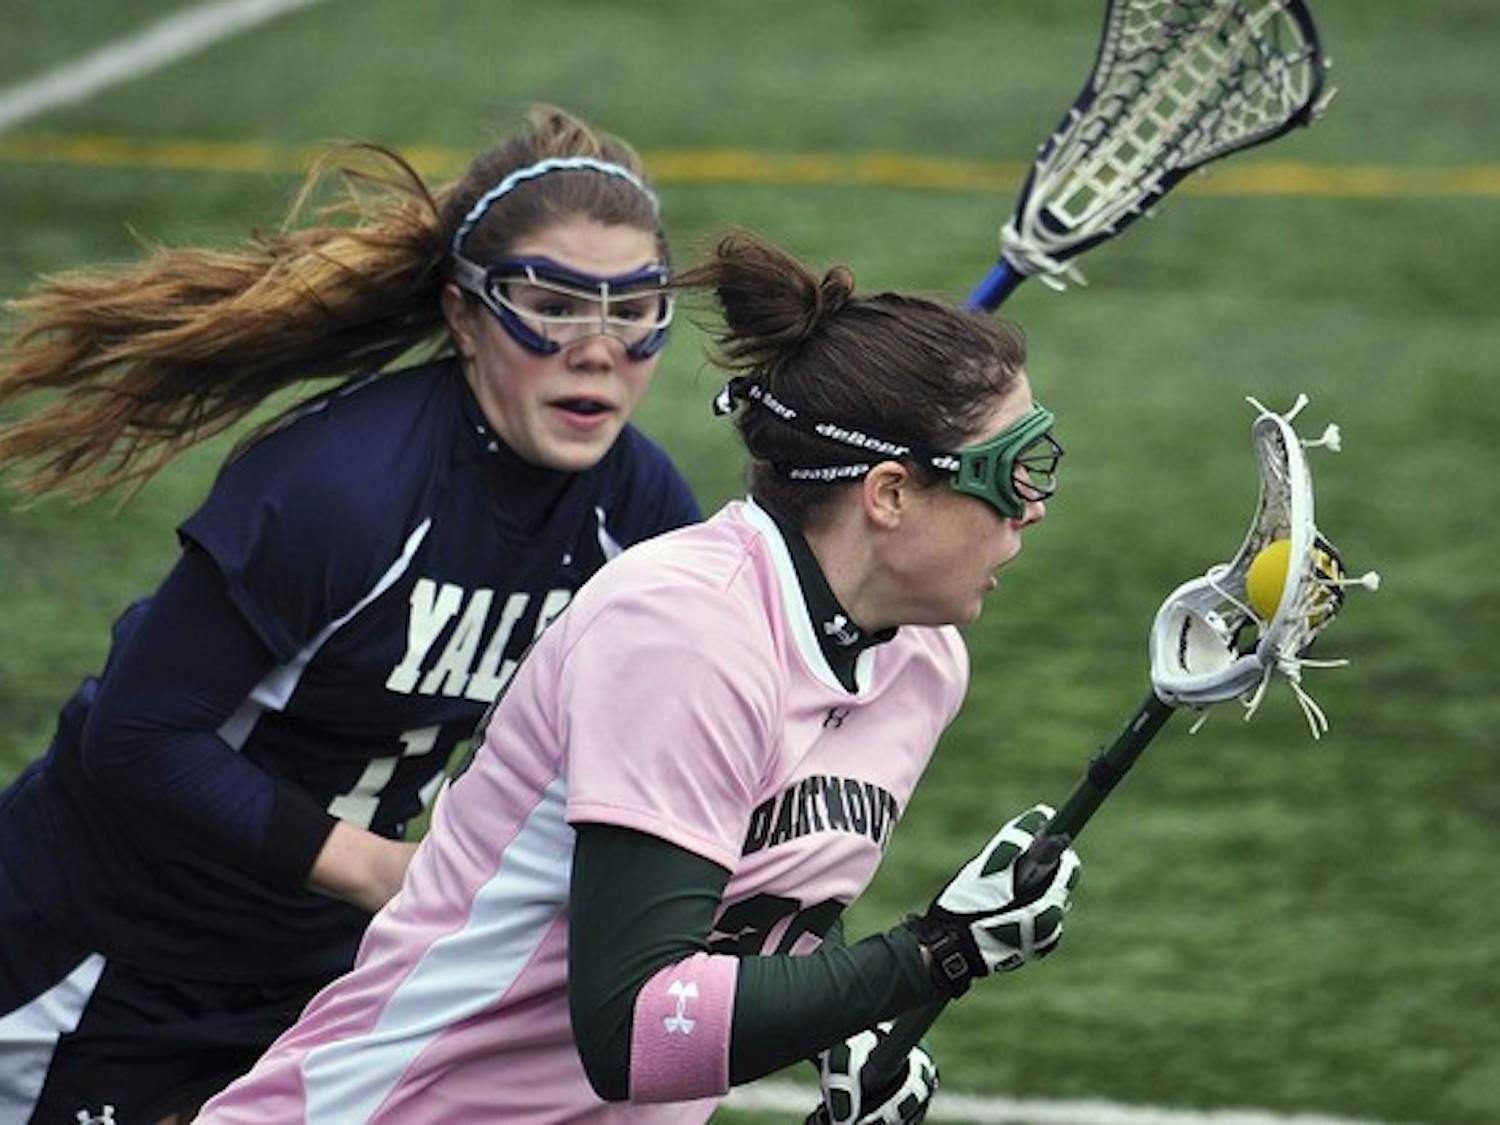 The women's lacrosse team will head to Harvard University on Friday with a chance to clinch home field advantage in the Ivy League Tournament.